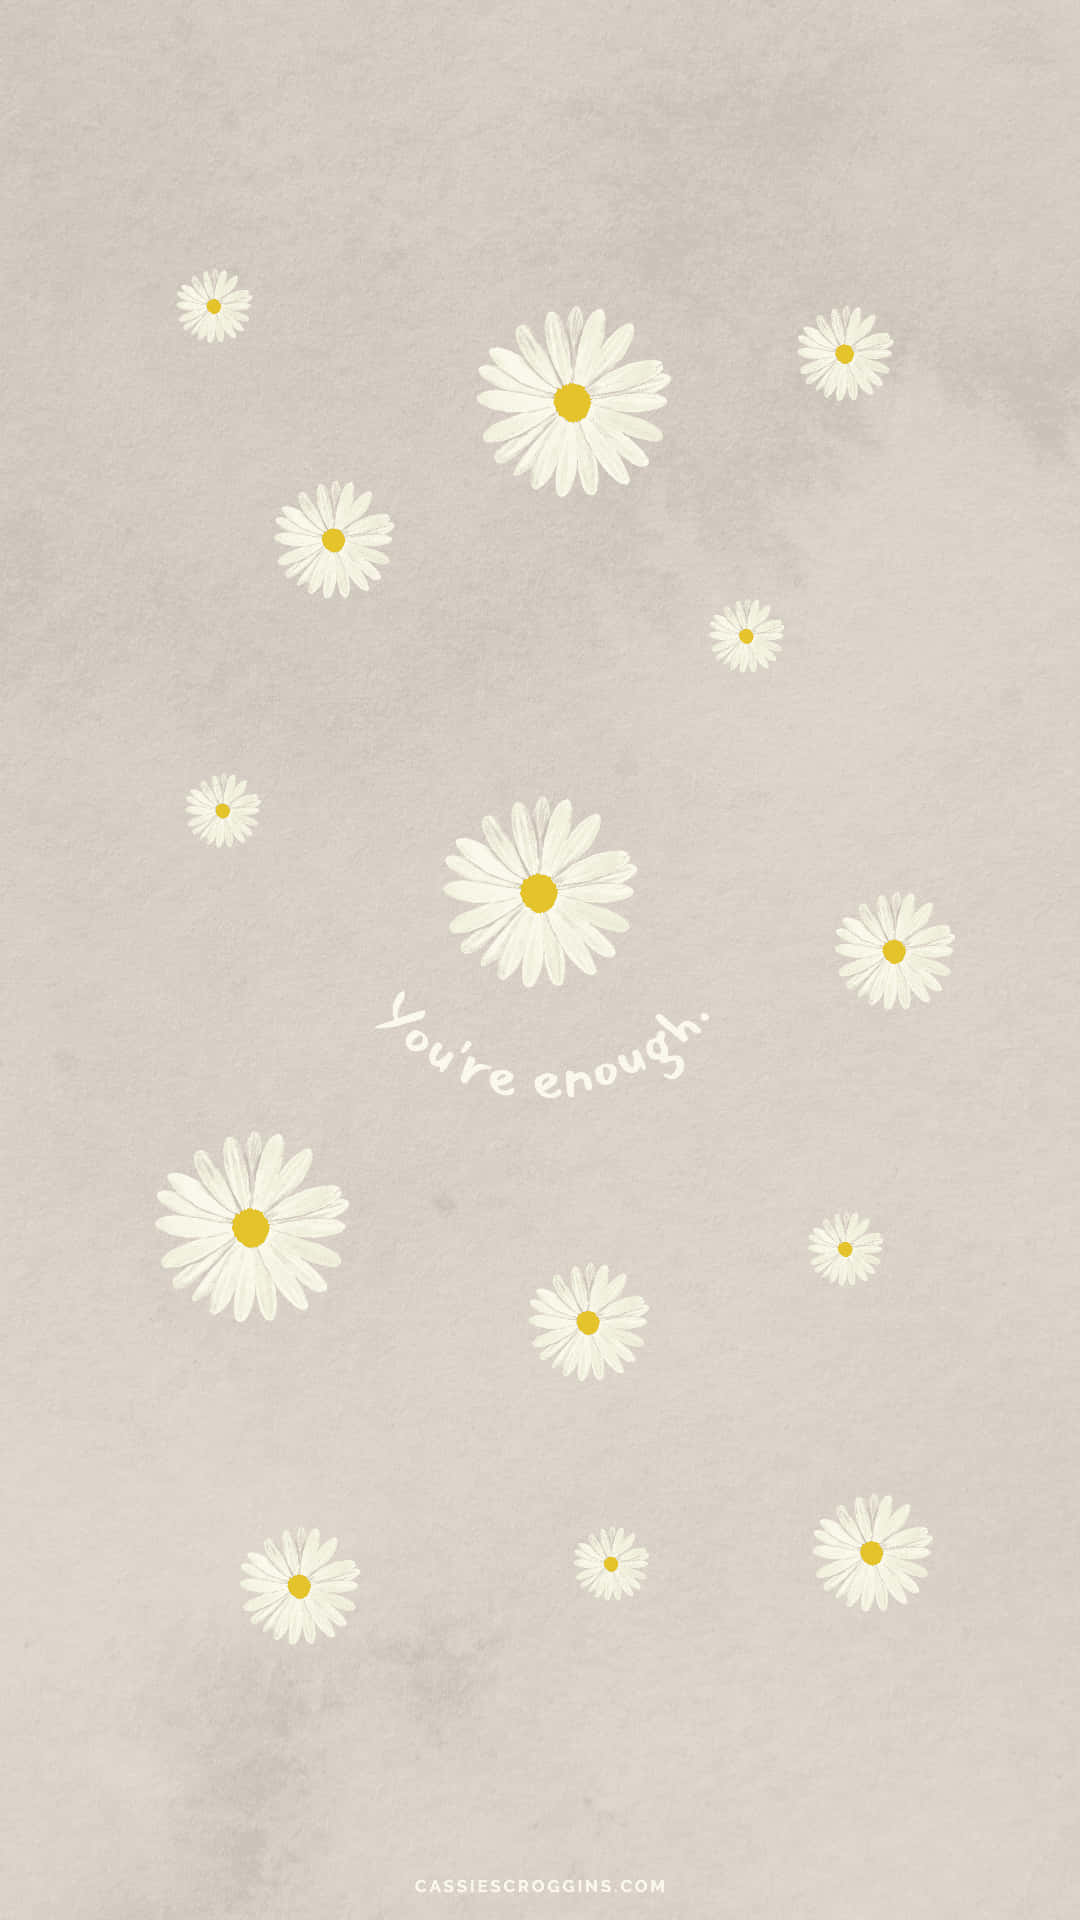 Daisies With The Words Love Enough Wallpaper